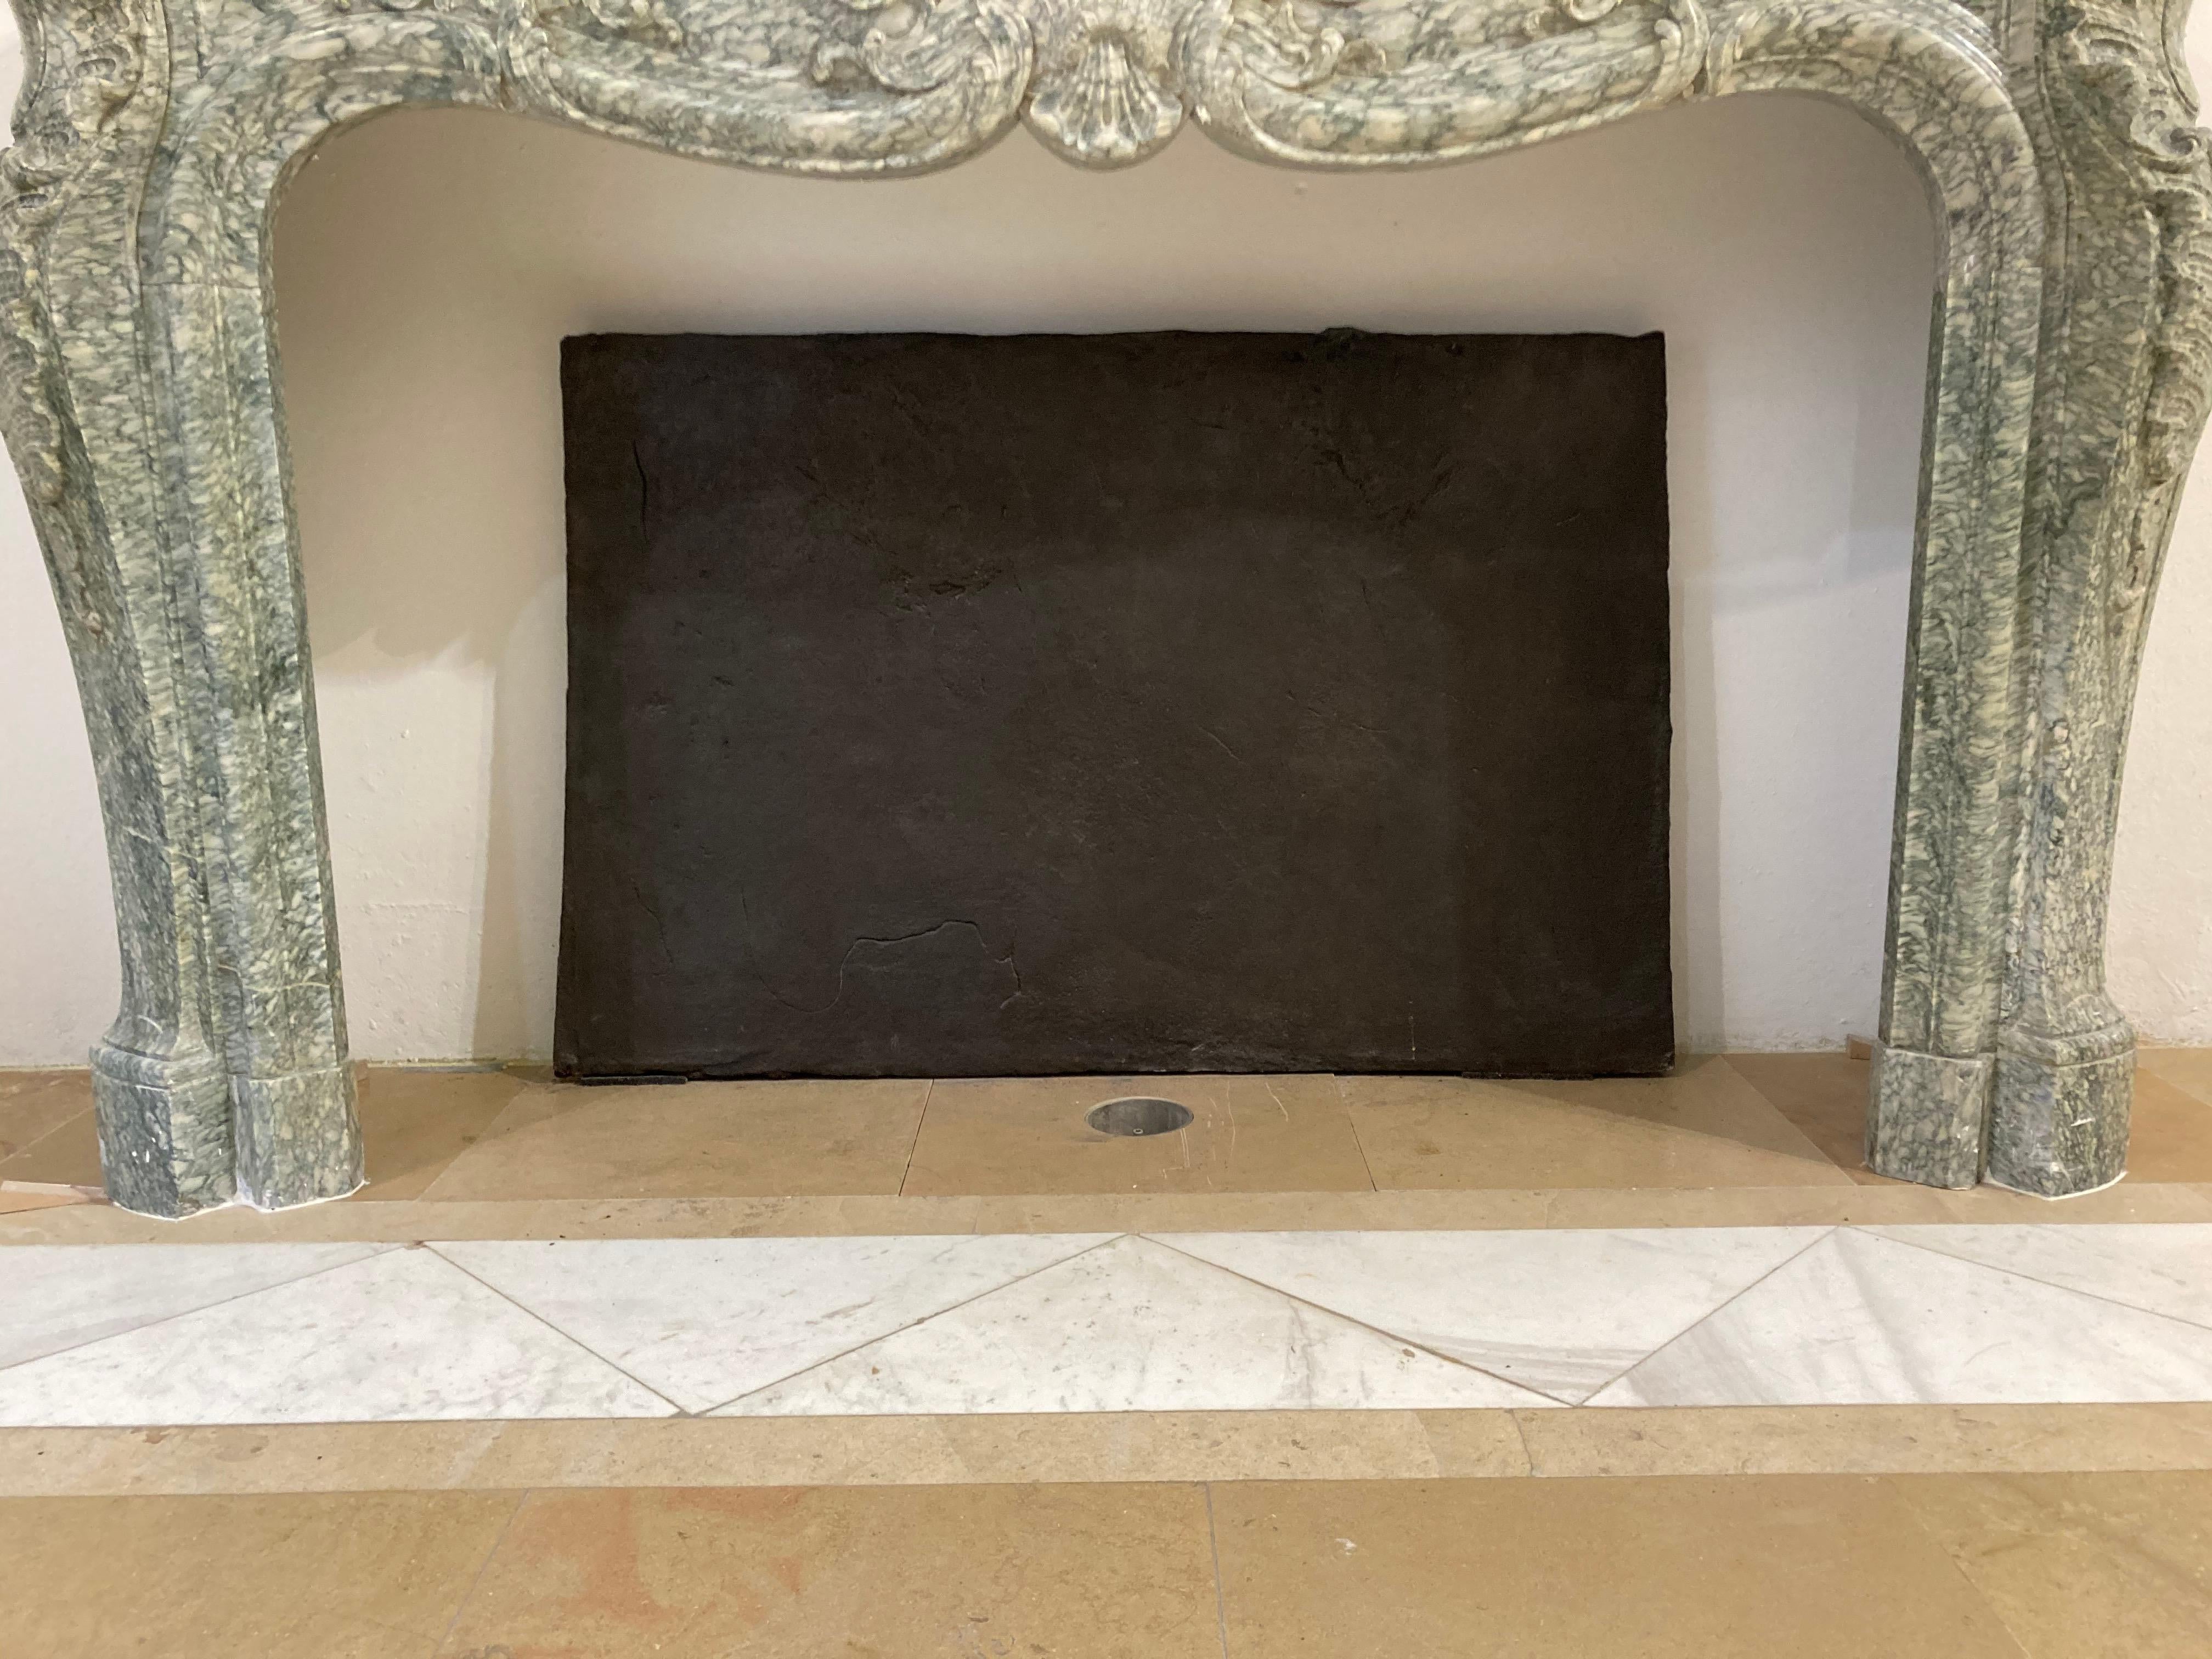 Massive, solid antique cast-iron slab.
This gothic tapered beauty is almost 2 inches (5 cm) thick.
It probably was originally used as a hearth floor, because of its thickness the heat is stored and will radiate for hours after the fire is